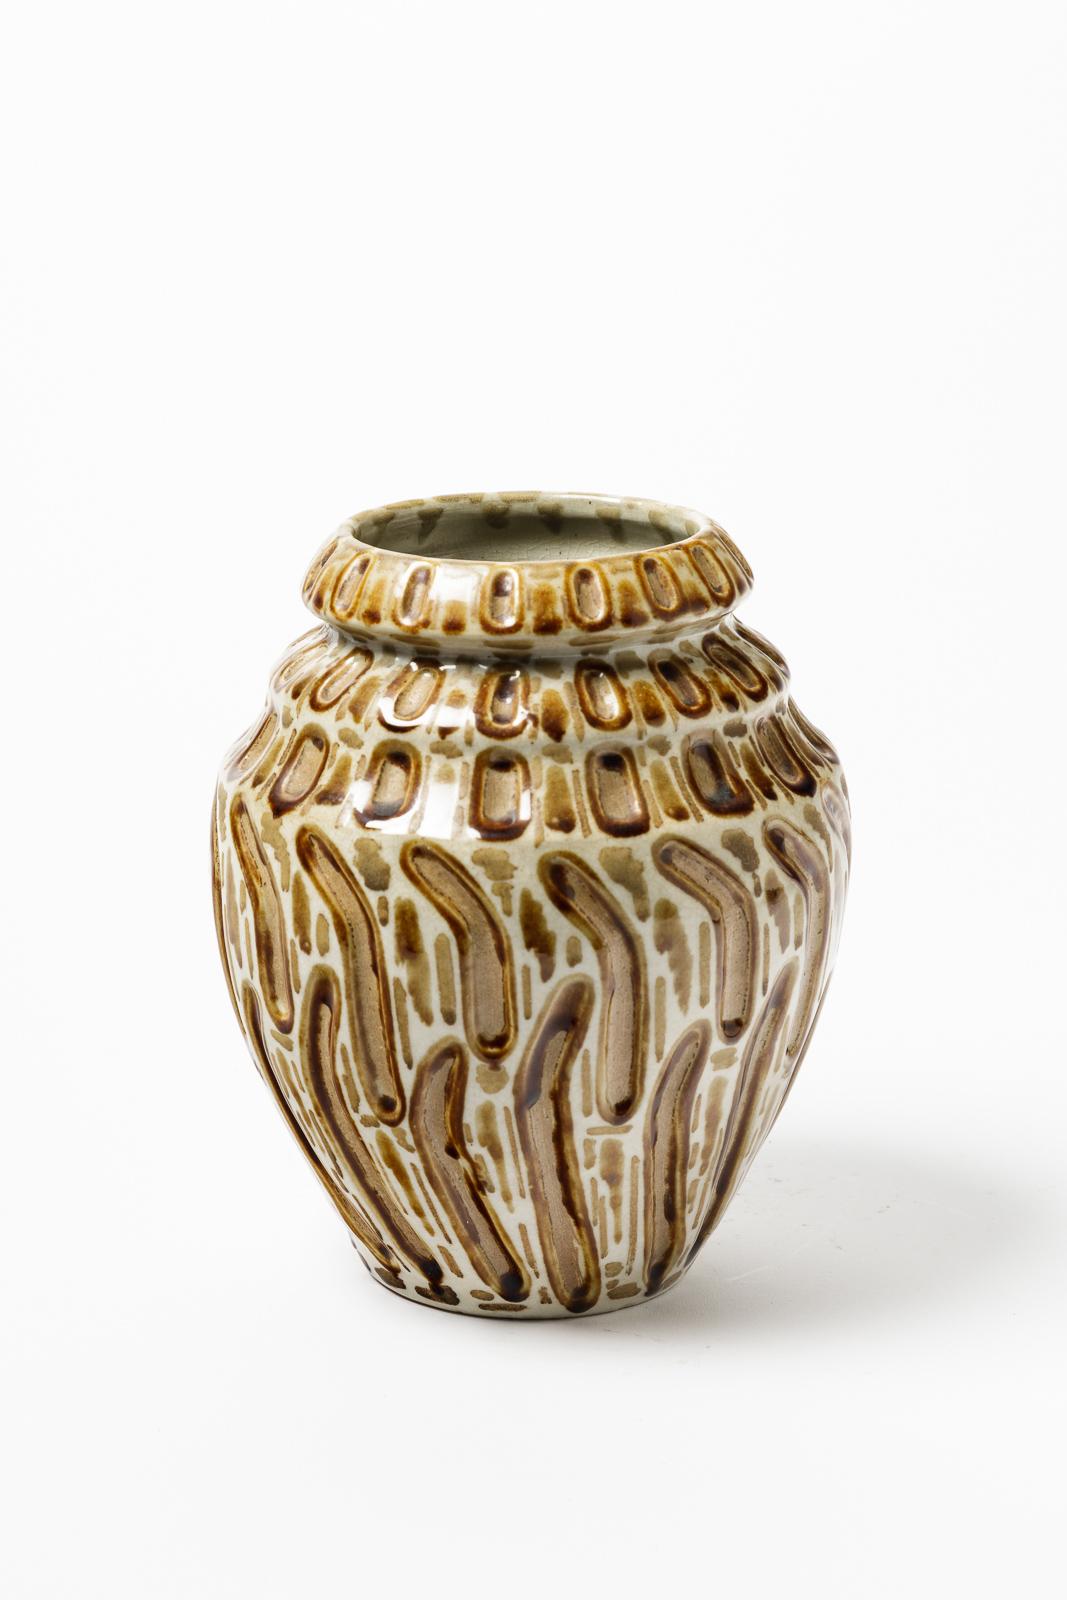 French Art Deco Brown and White Stoneware Ceramic Vase by Adrienne Picart, circa 1940  For Sale